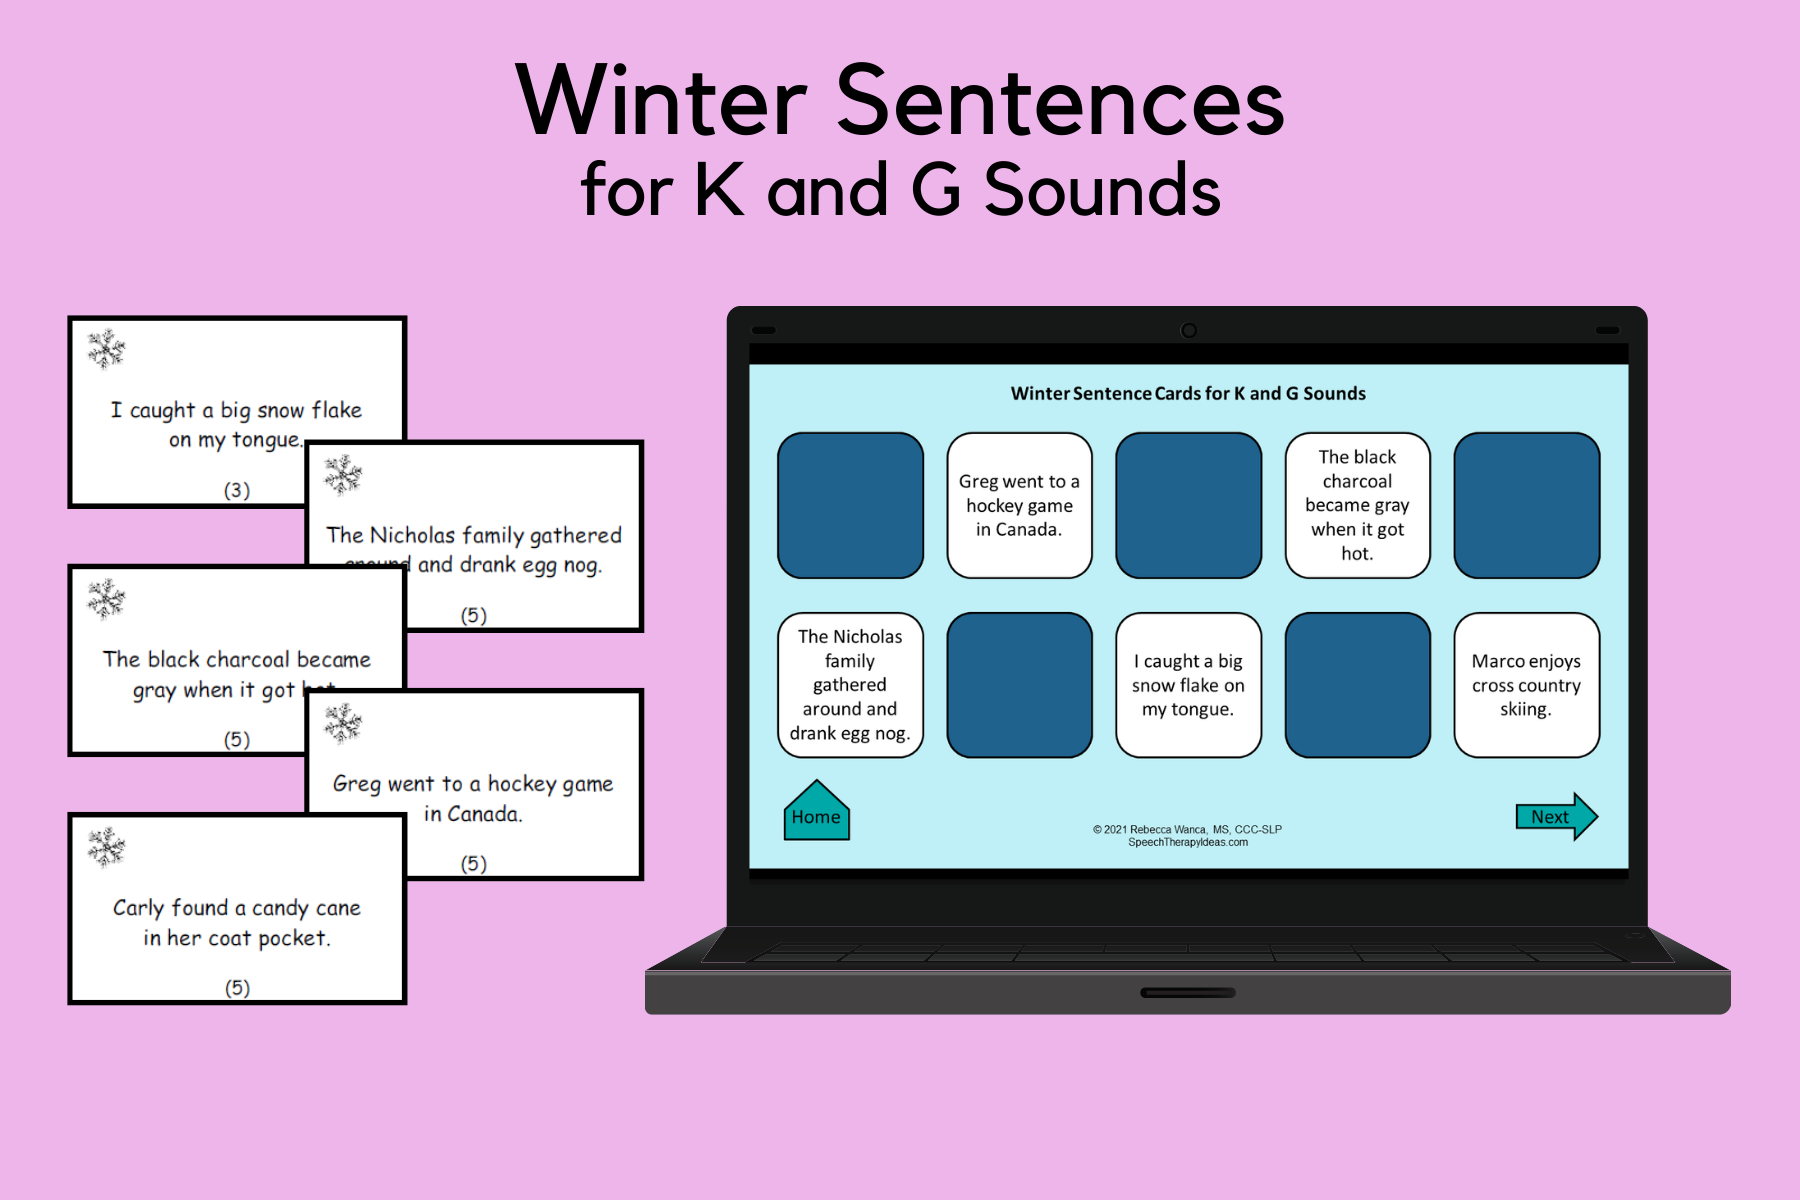 Winter Sound Sentences for K and G Sounds